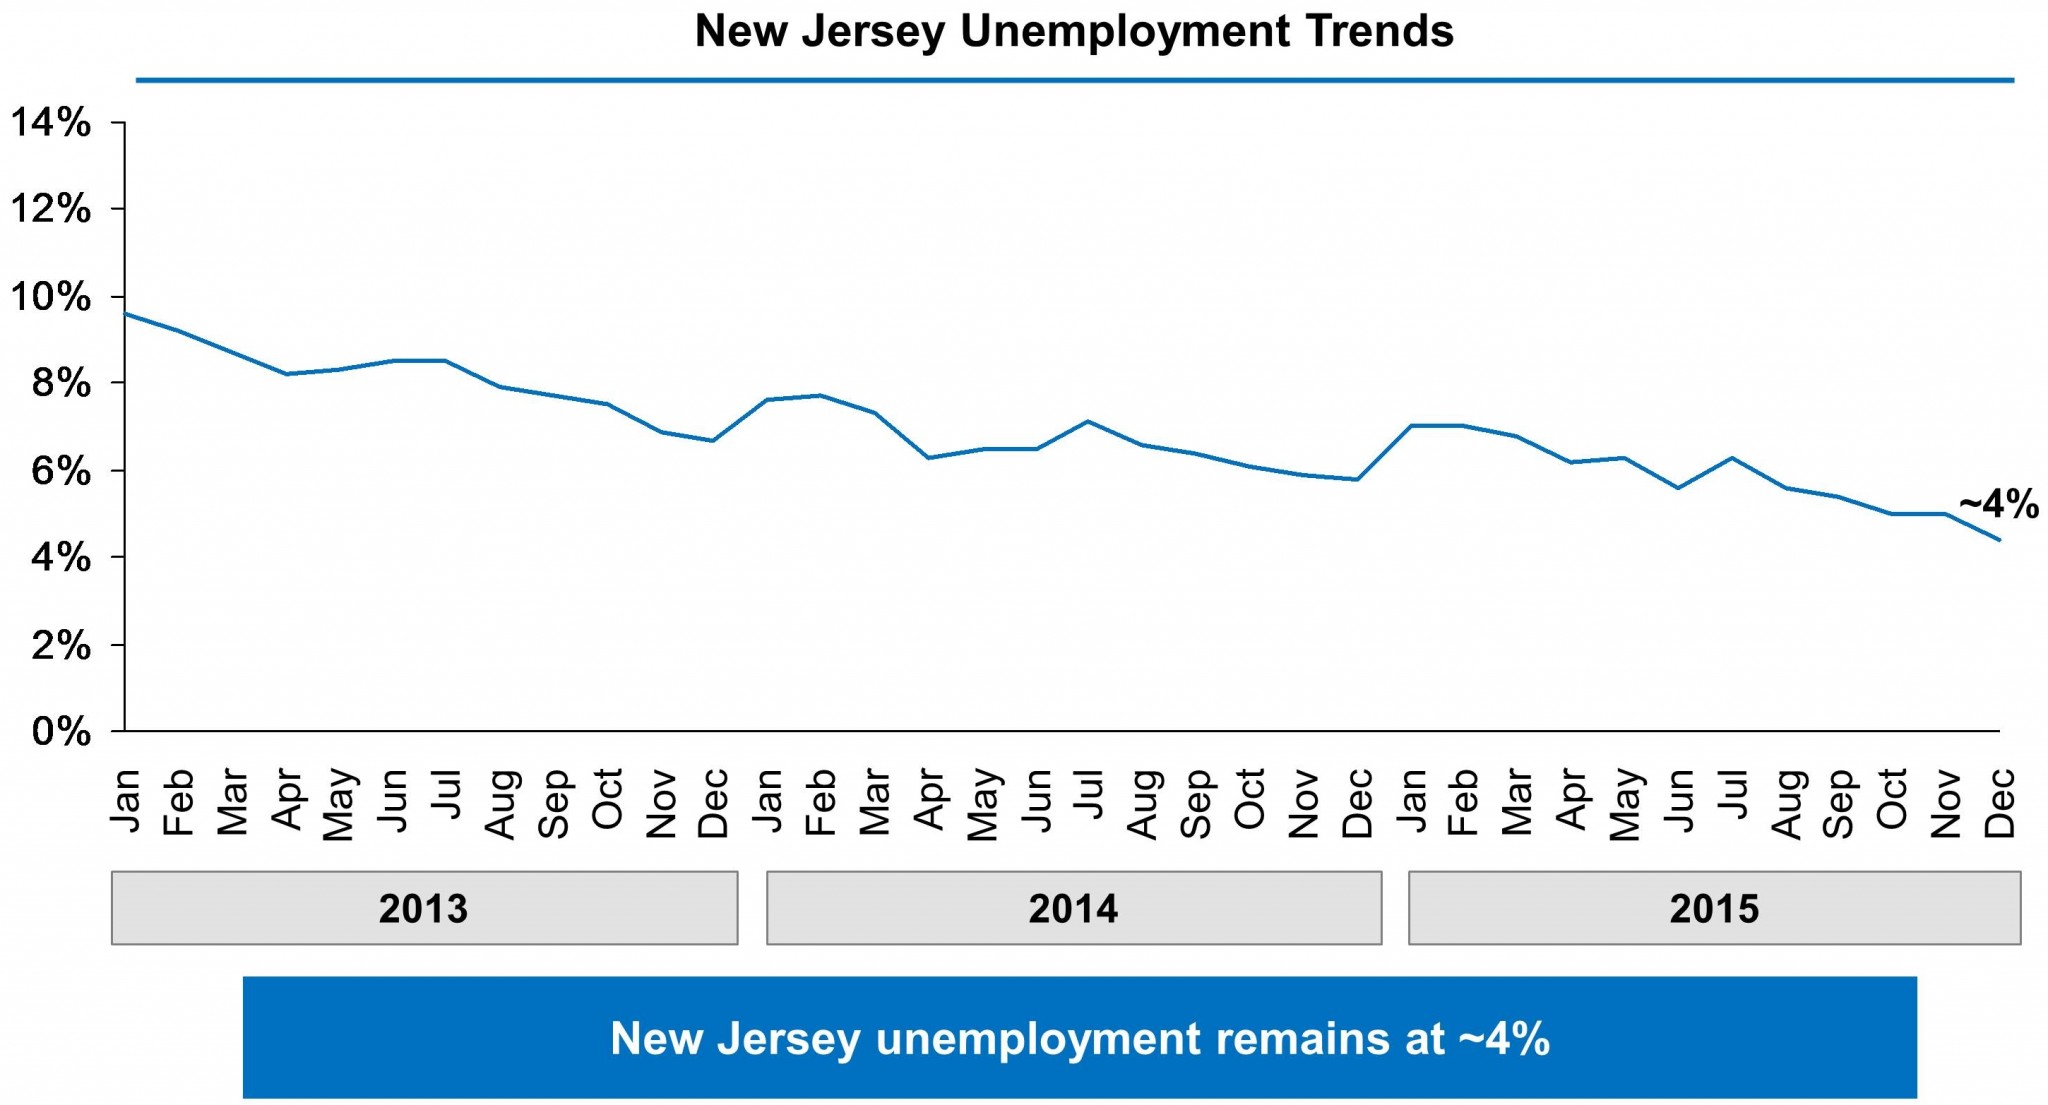 Chart showing New Jersey’s unemployment rate falling from just below 10% in January 2013 to 4.4% in December 2015.